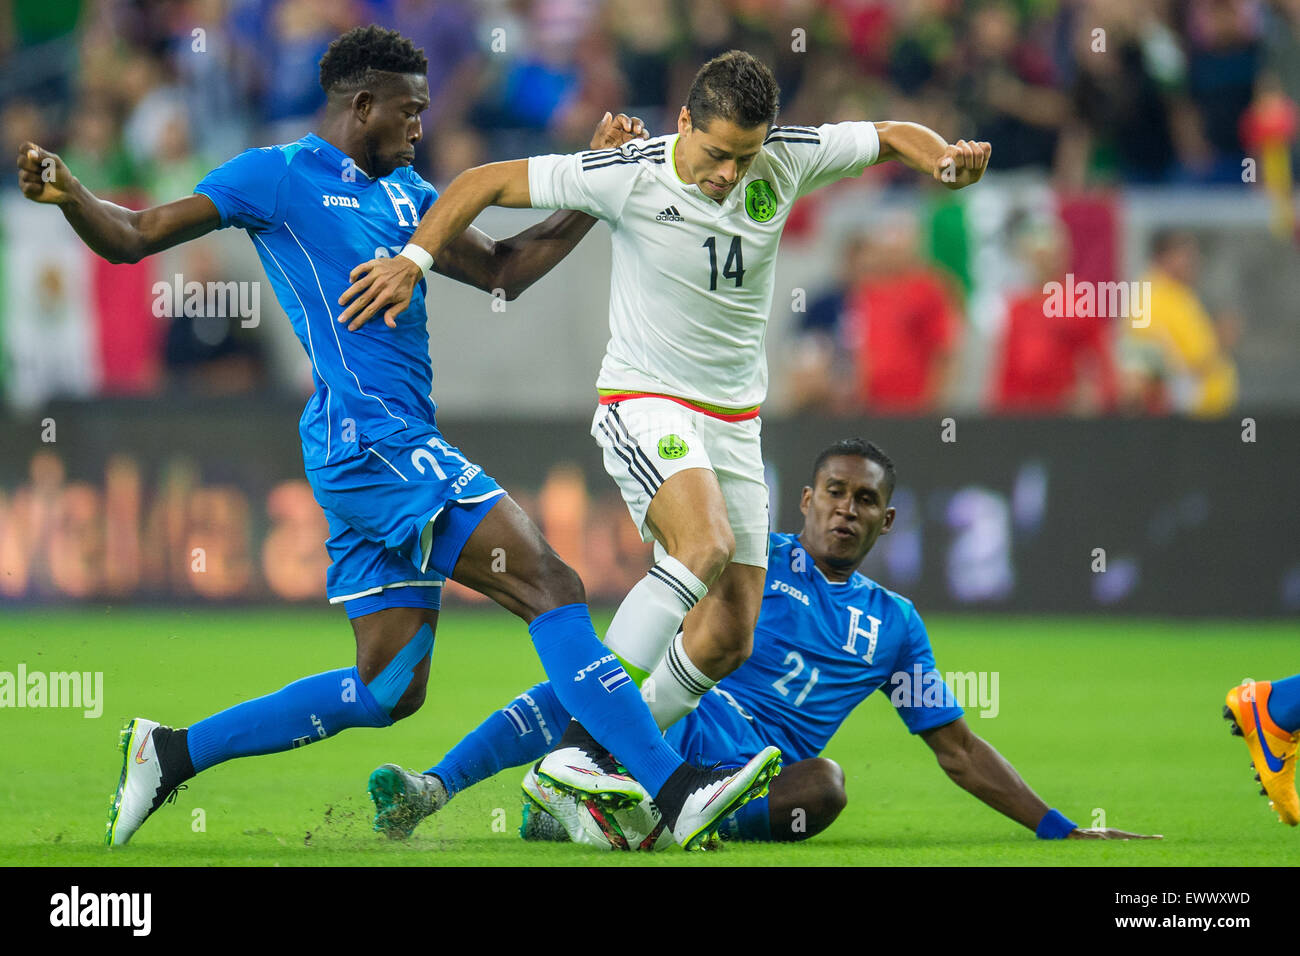 Houston, TX, USA. 1st July, 2015. Mexico forward Javier Hernandez (14) gets fouled by Honduras defender Johnny Palacios (23) and Honduras defender Brayan Beckeles (21) during the 1st half of an international soccer match between Honduras and Mexico at NRG Stadium in Houston, TX. Trask Smith/CSM/Alamy Live News Stock Photo